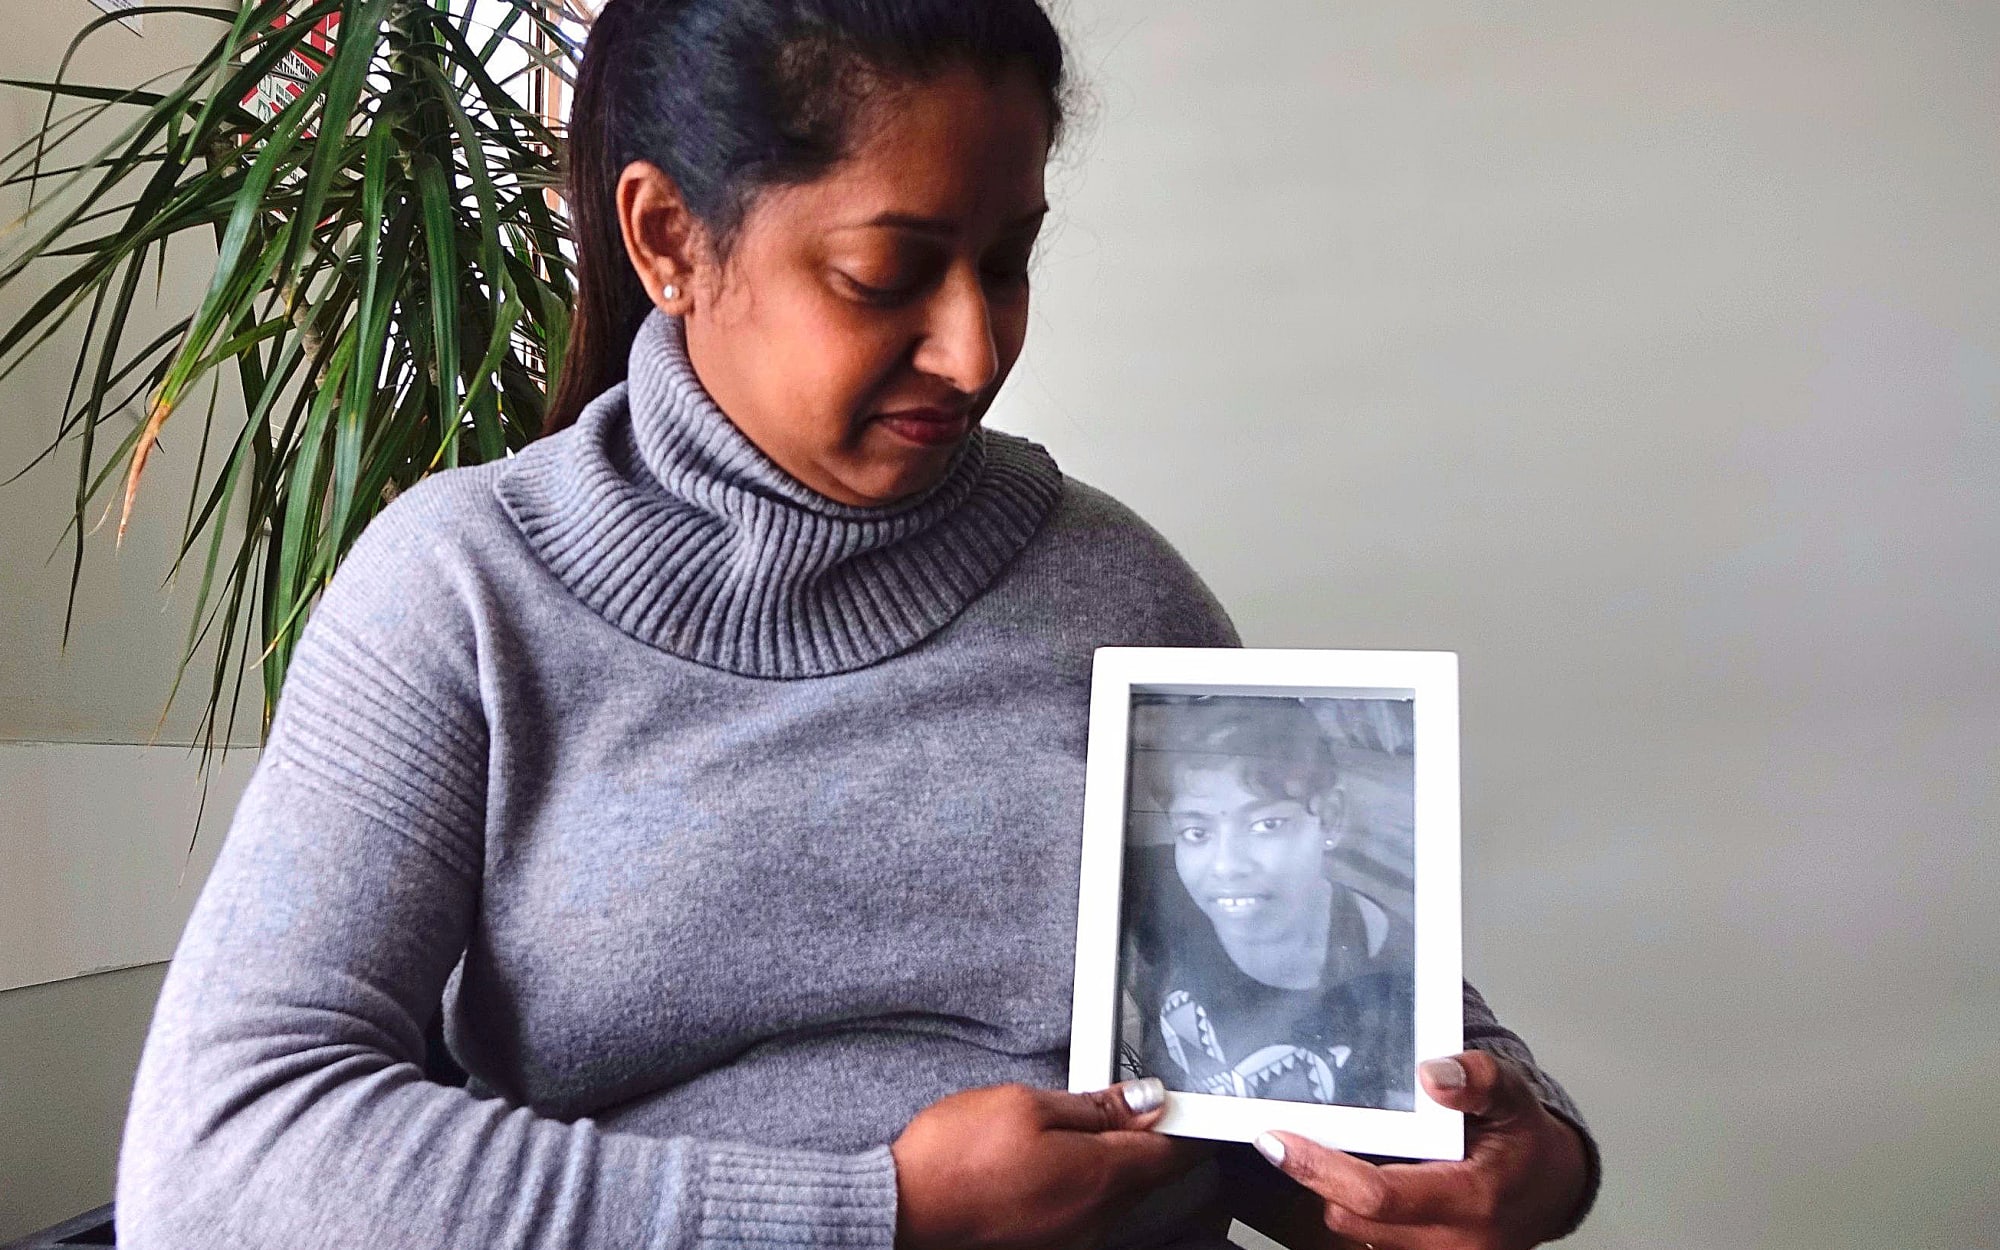 Sangeeta Bali holds a photograph of her daughter Shurti, 13, who lives in Fiji and has been denied a visa to come to New Zealand